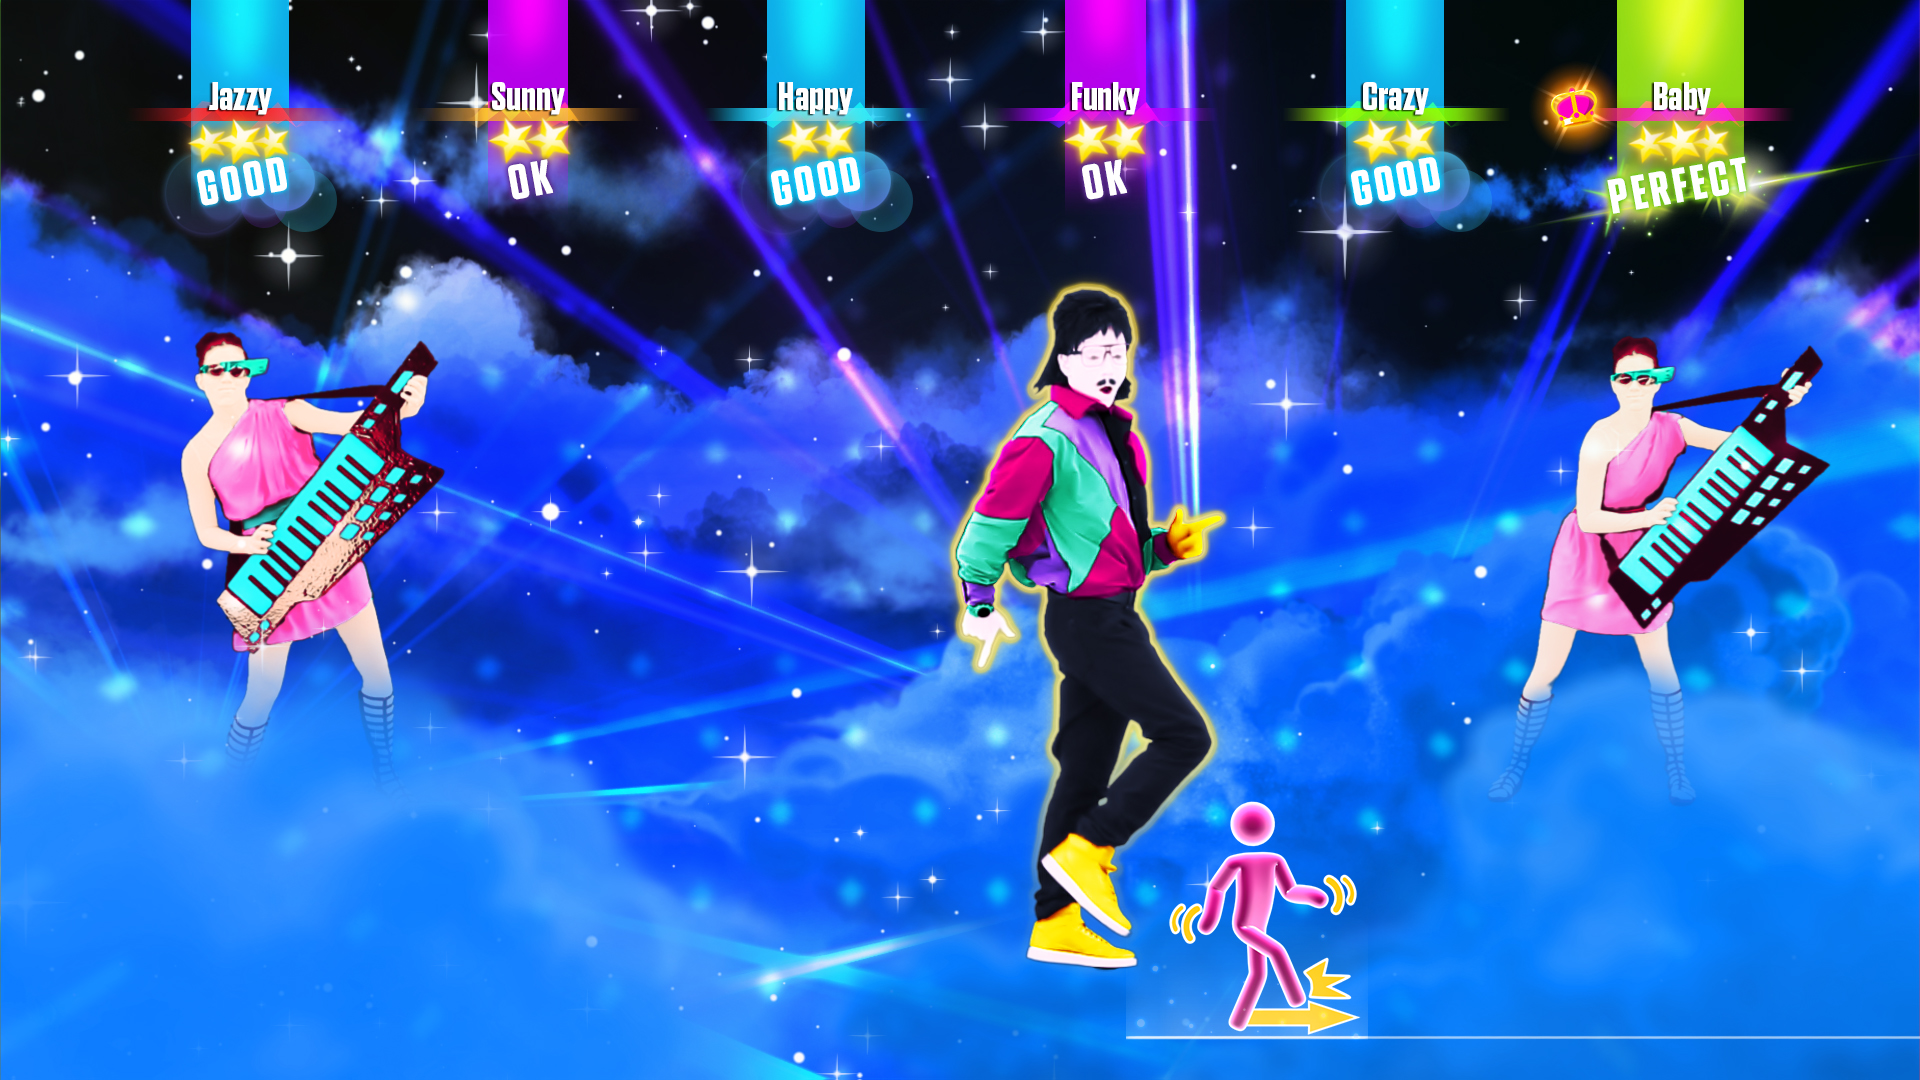 Find the best computers for Just Dance 2017